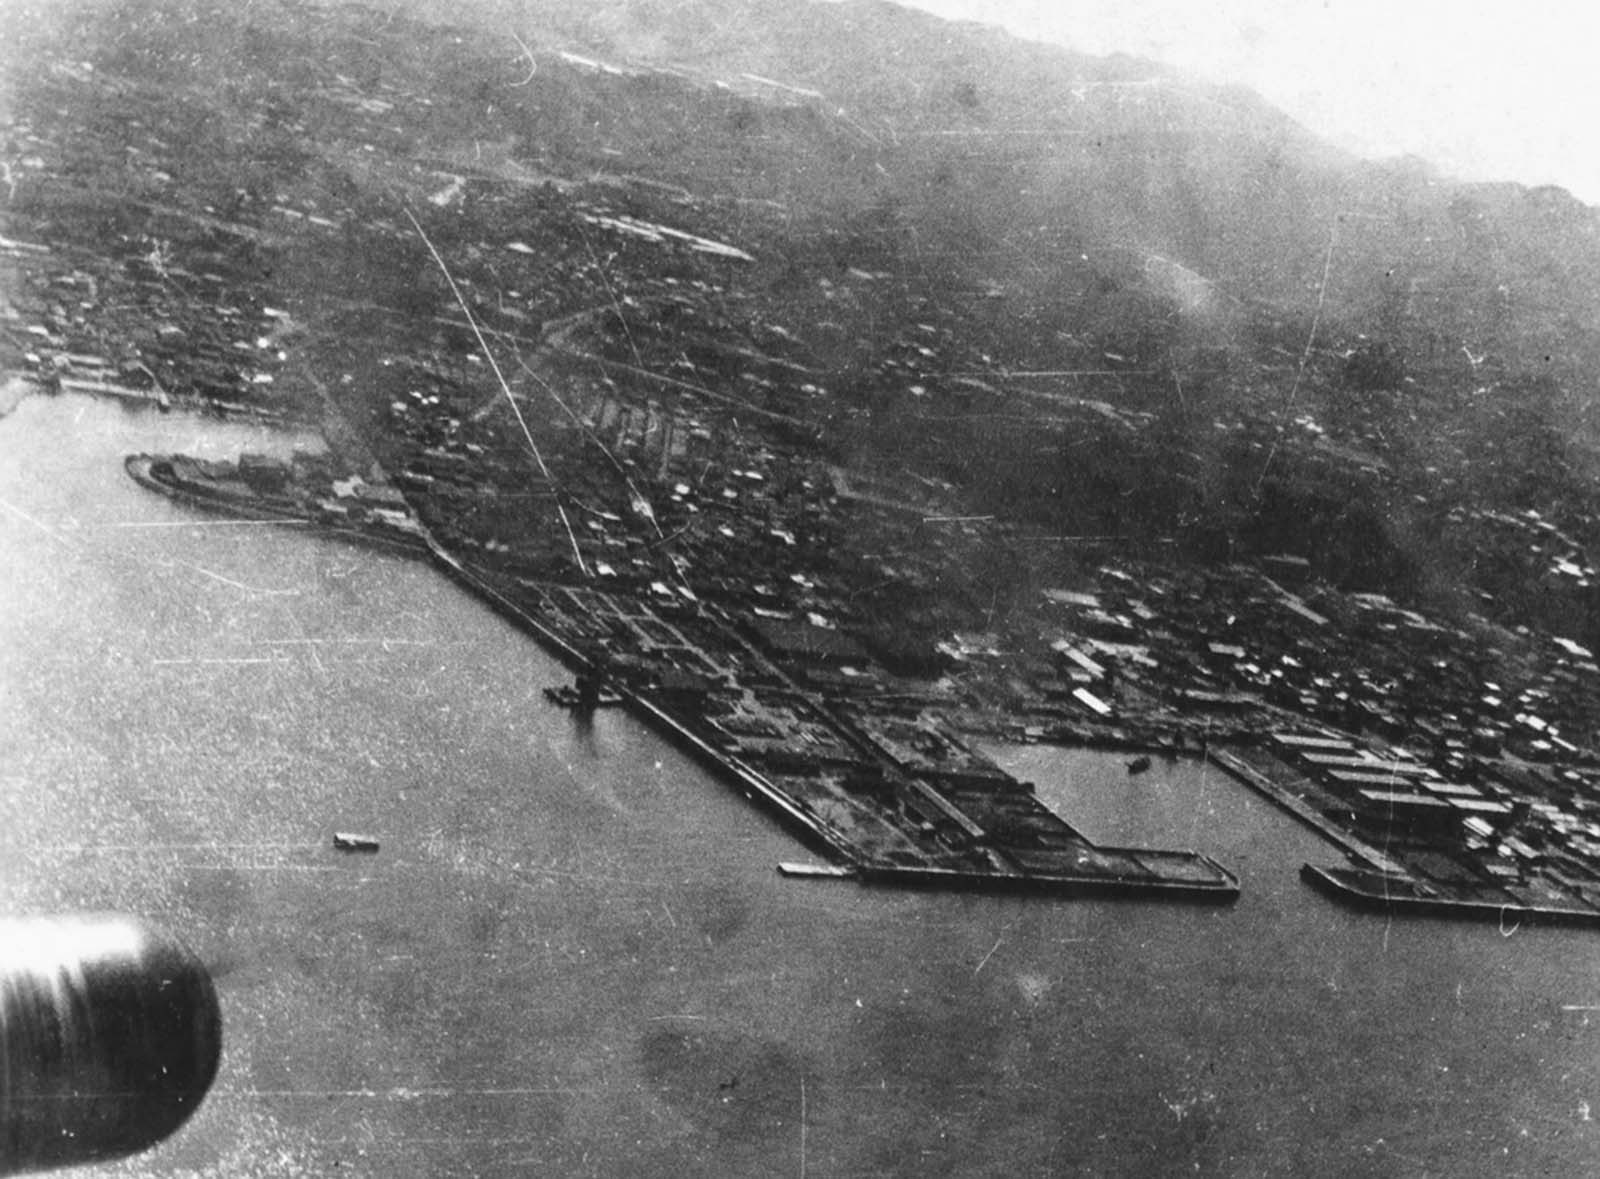 Above Tokyo, smoke rises from strikes on the Japanese mainland as the bombs dropped by Doolittle's raiders hit their targets on April 18, 1942. Unable to land the huge aircraft back on the USS Hornet, and running low on fuel, the bombers continued westward attempting to land in a friendly area in China.